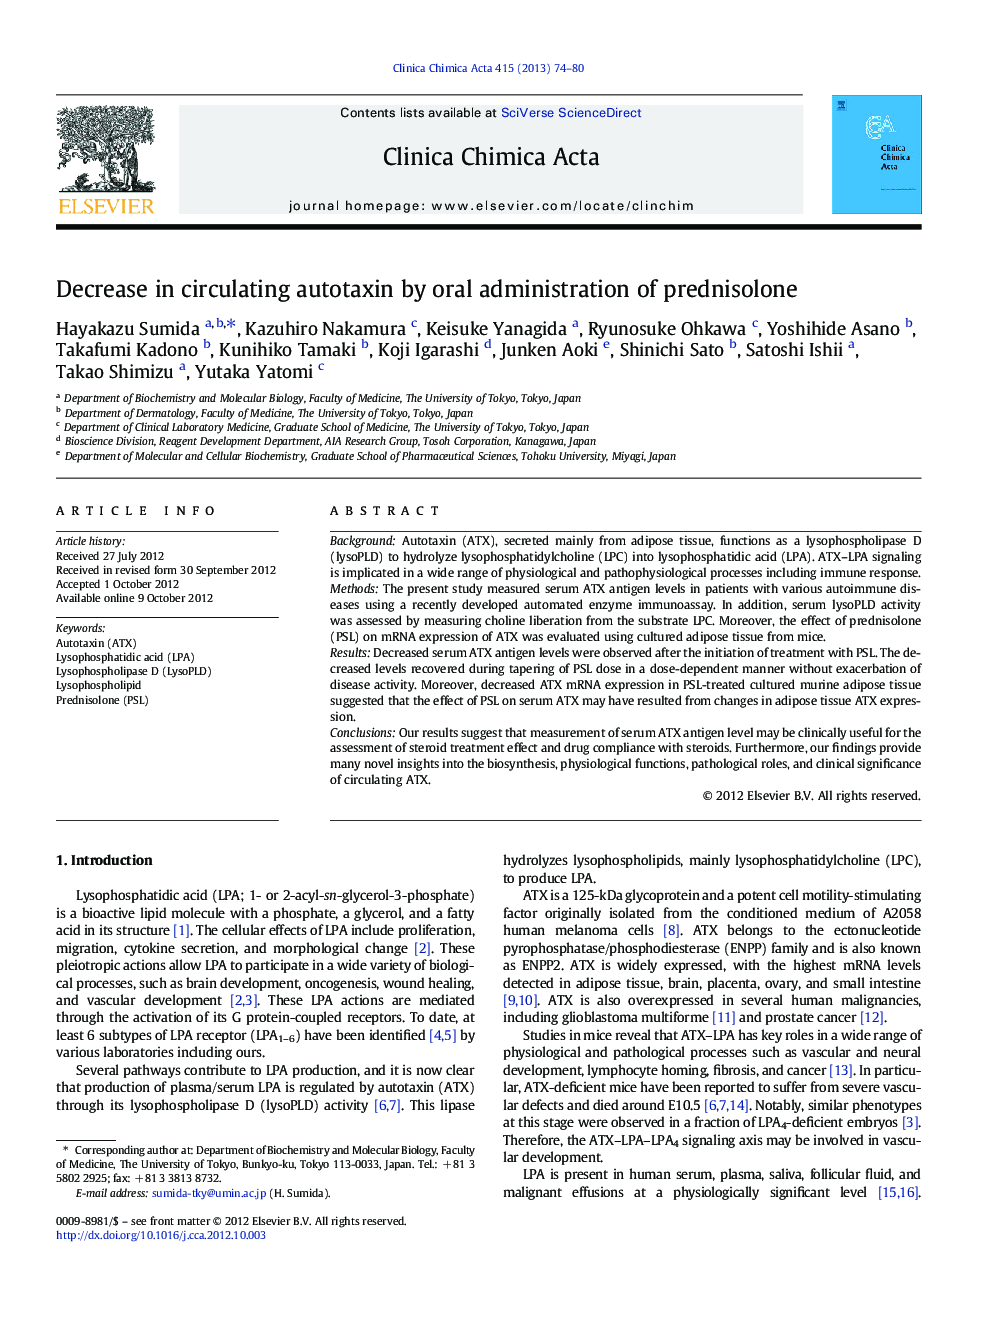 Decrease in circulating autotaxin by oral administration of prednisolone